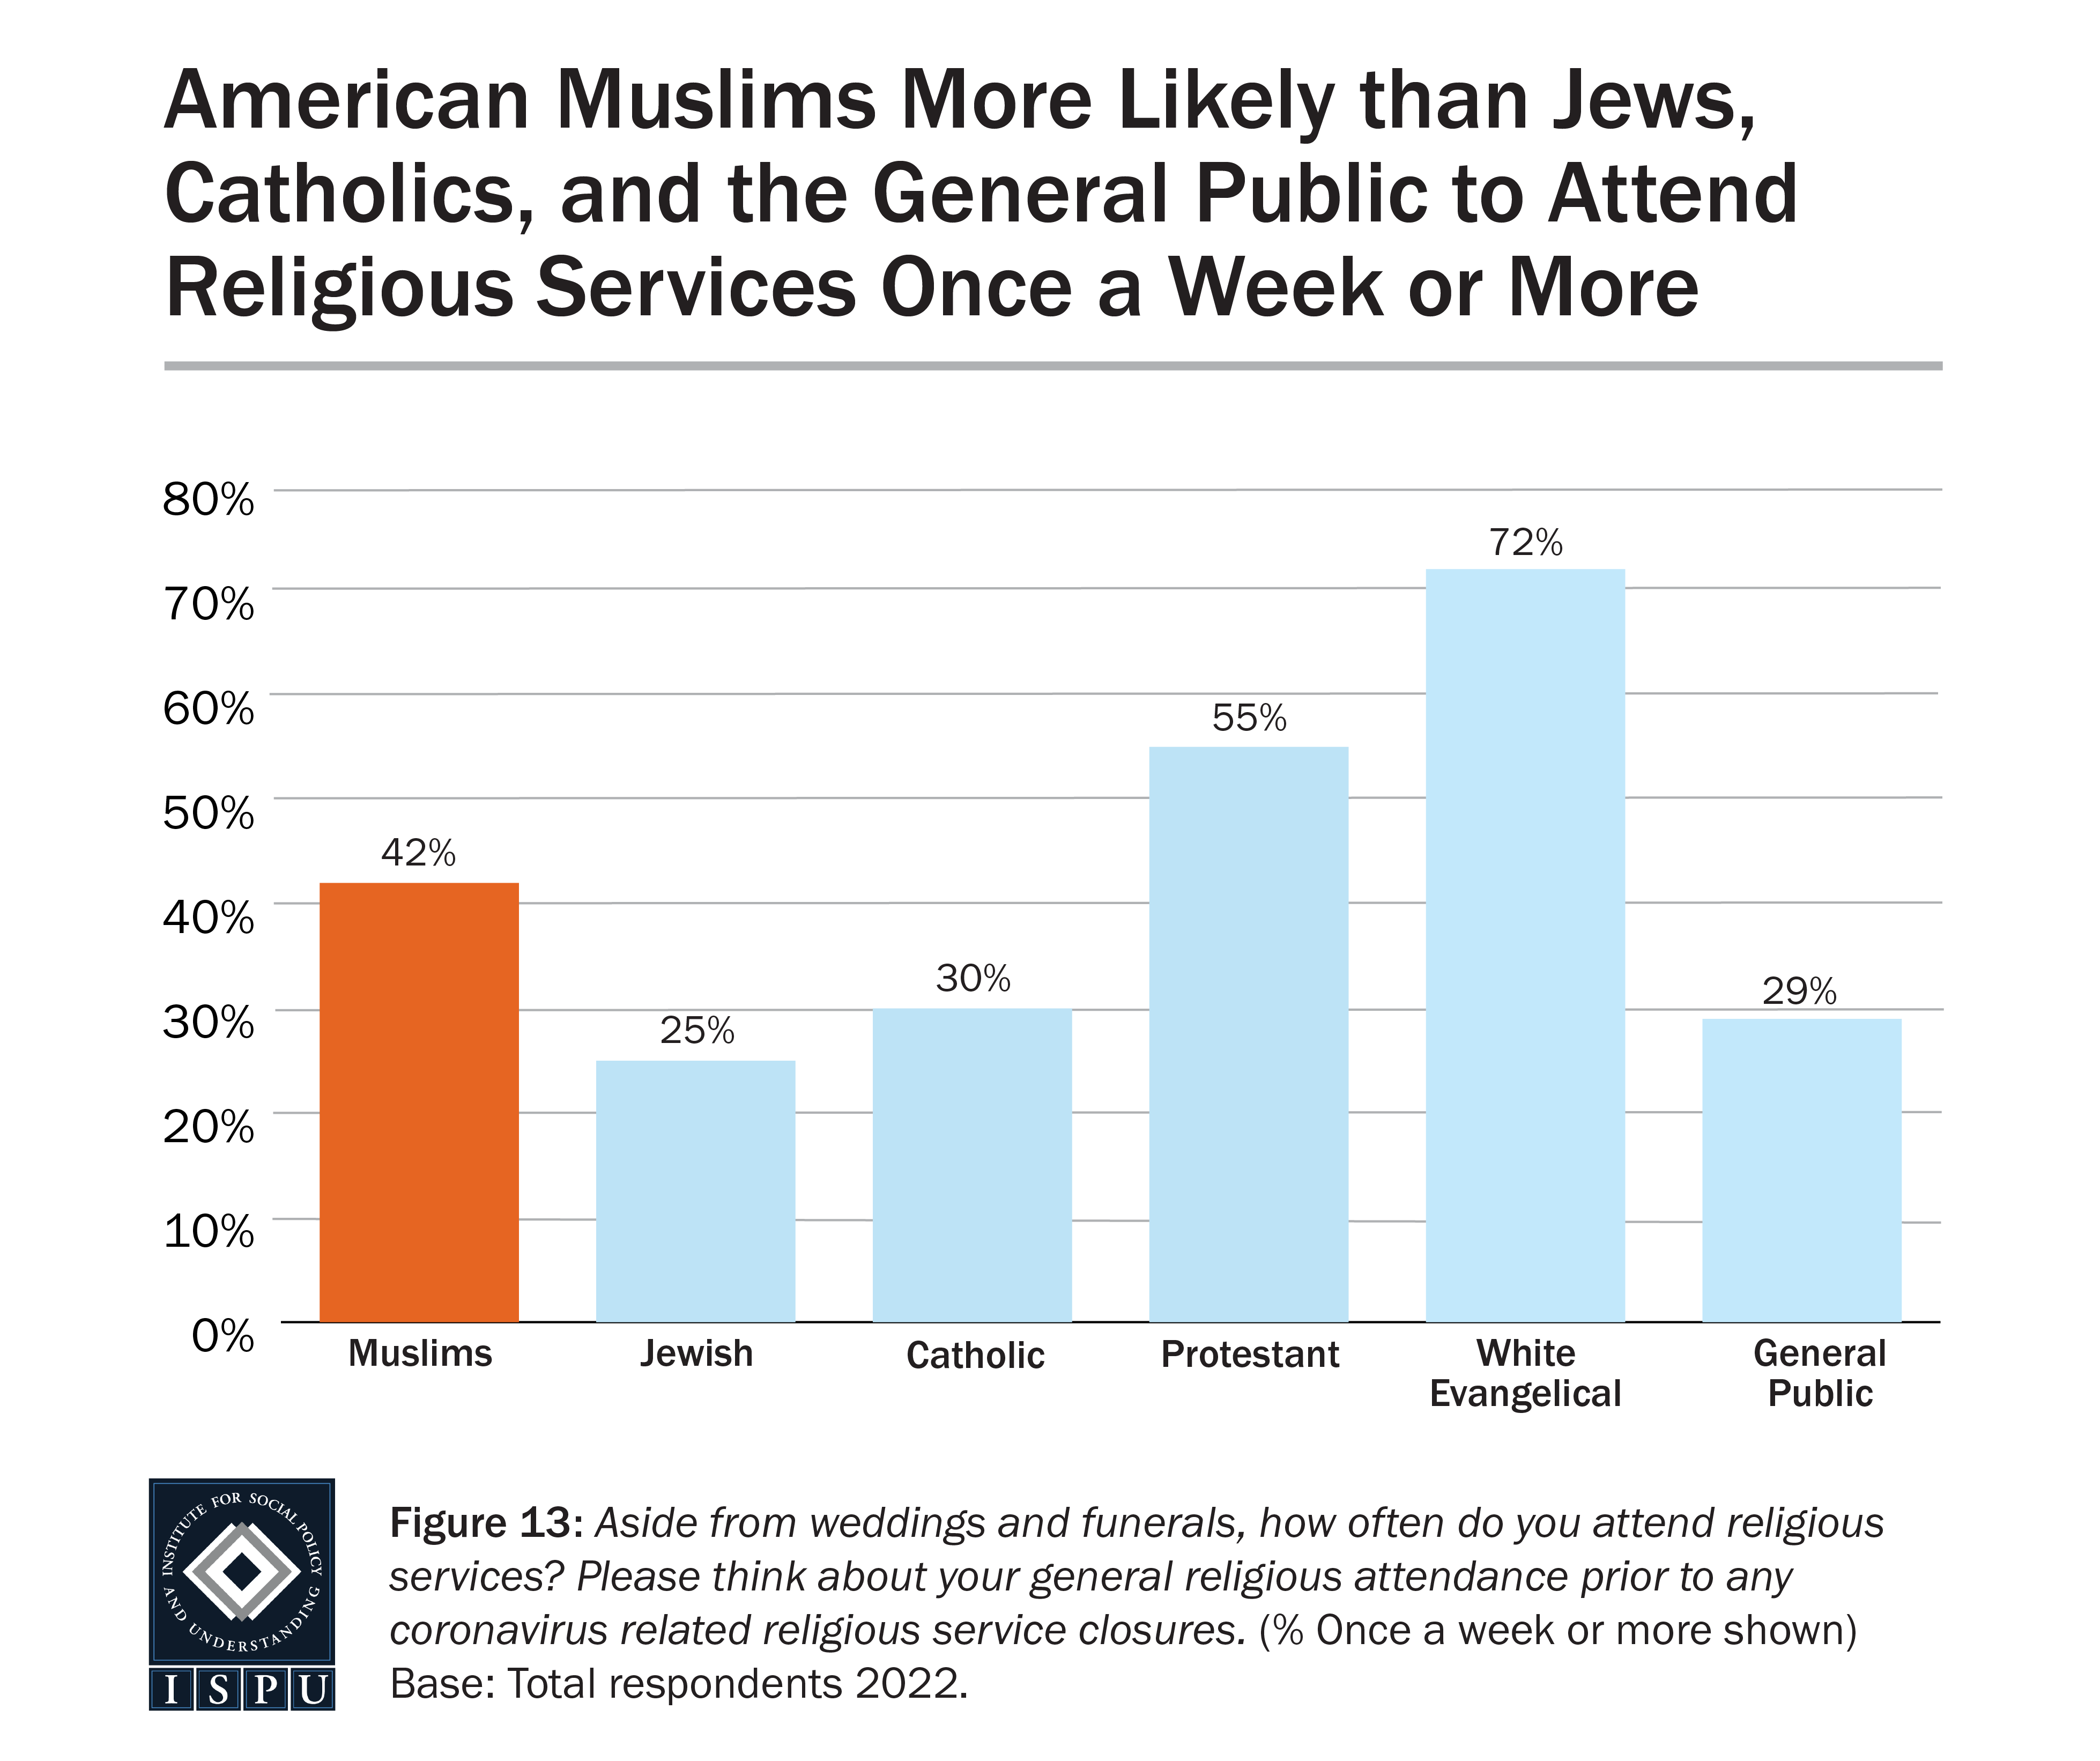 A bar graph showing the proportion among religious groups who attend a religious service once a week or more.